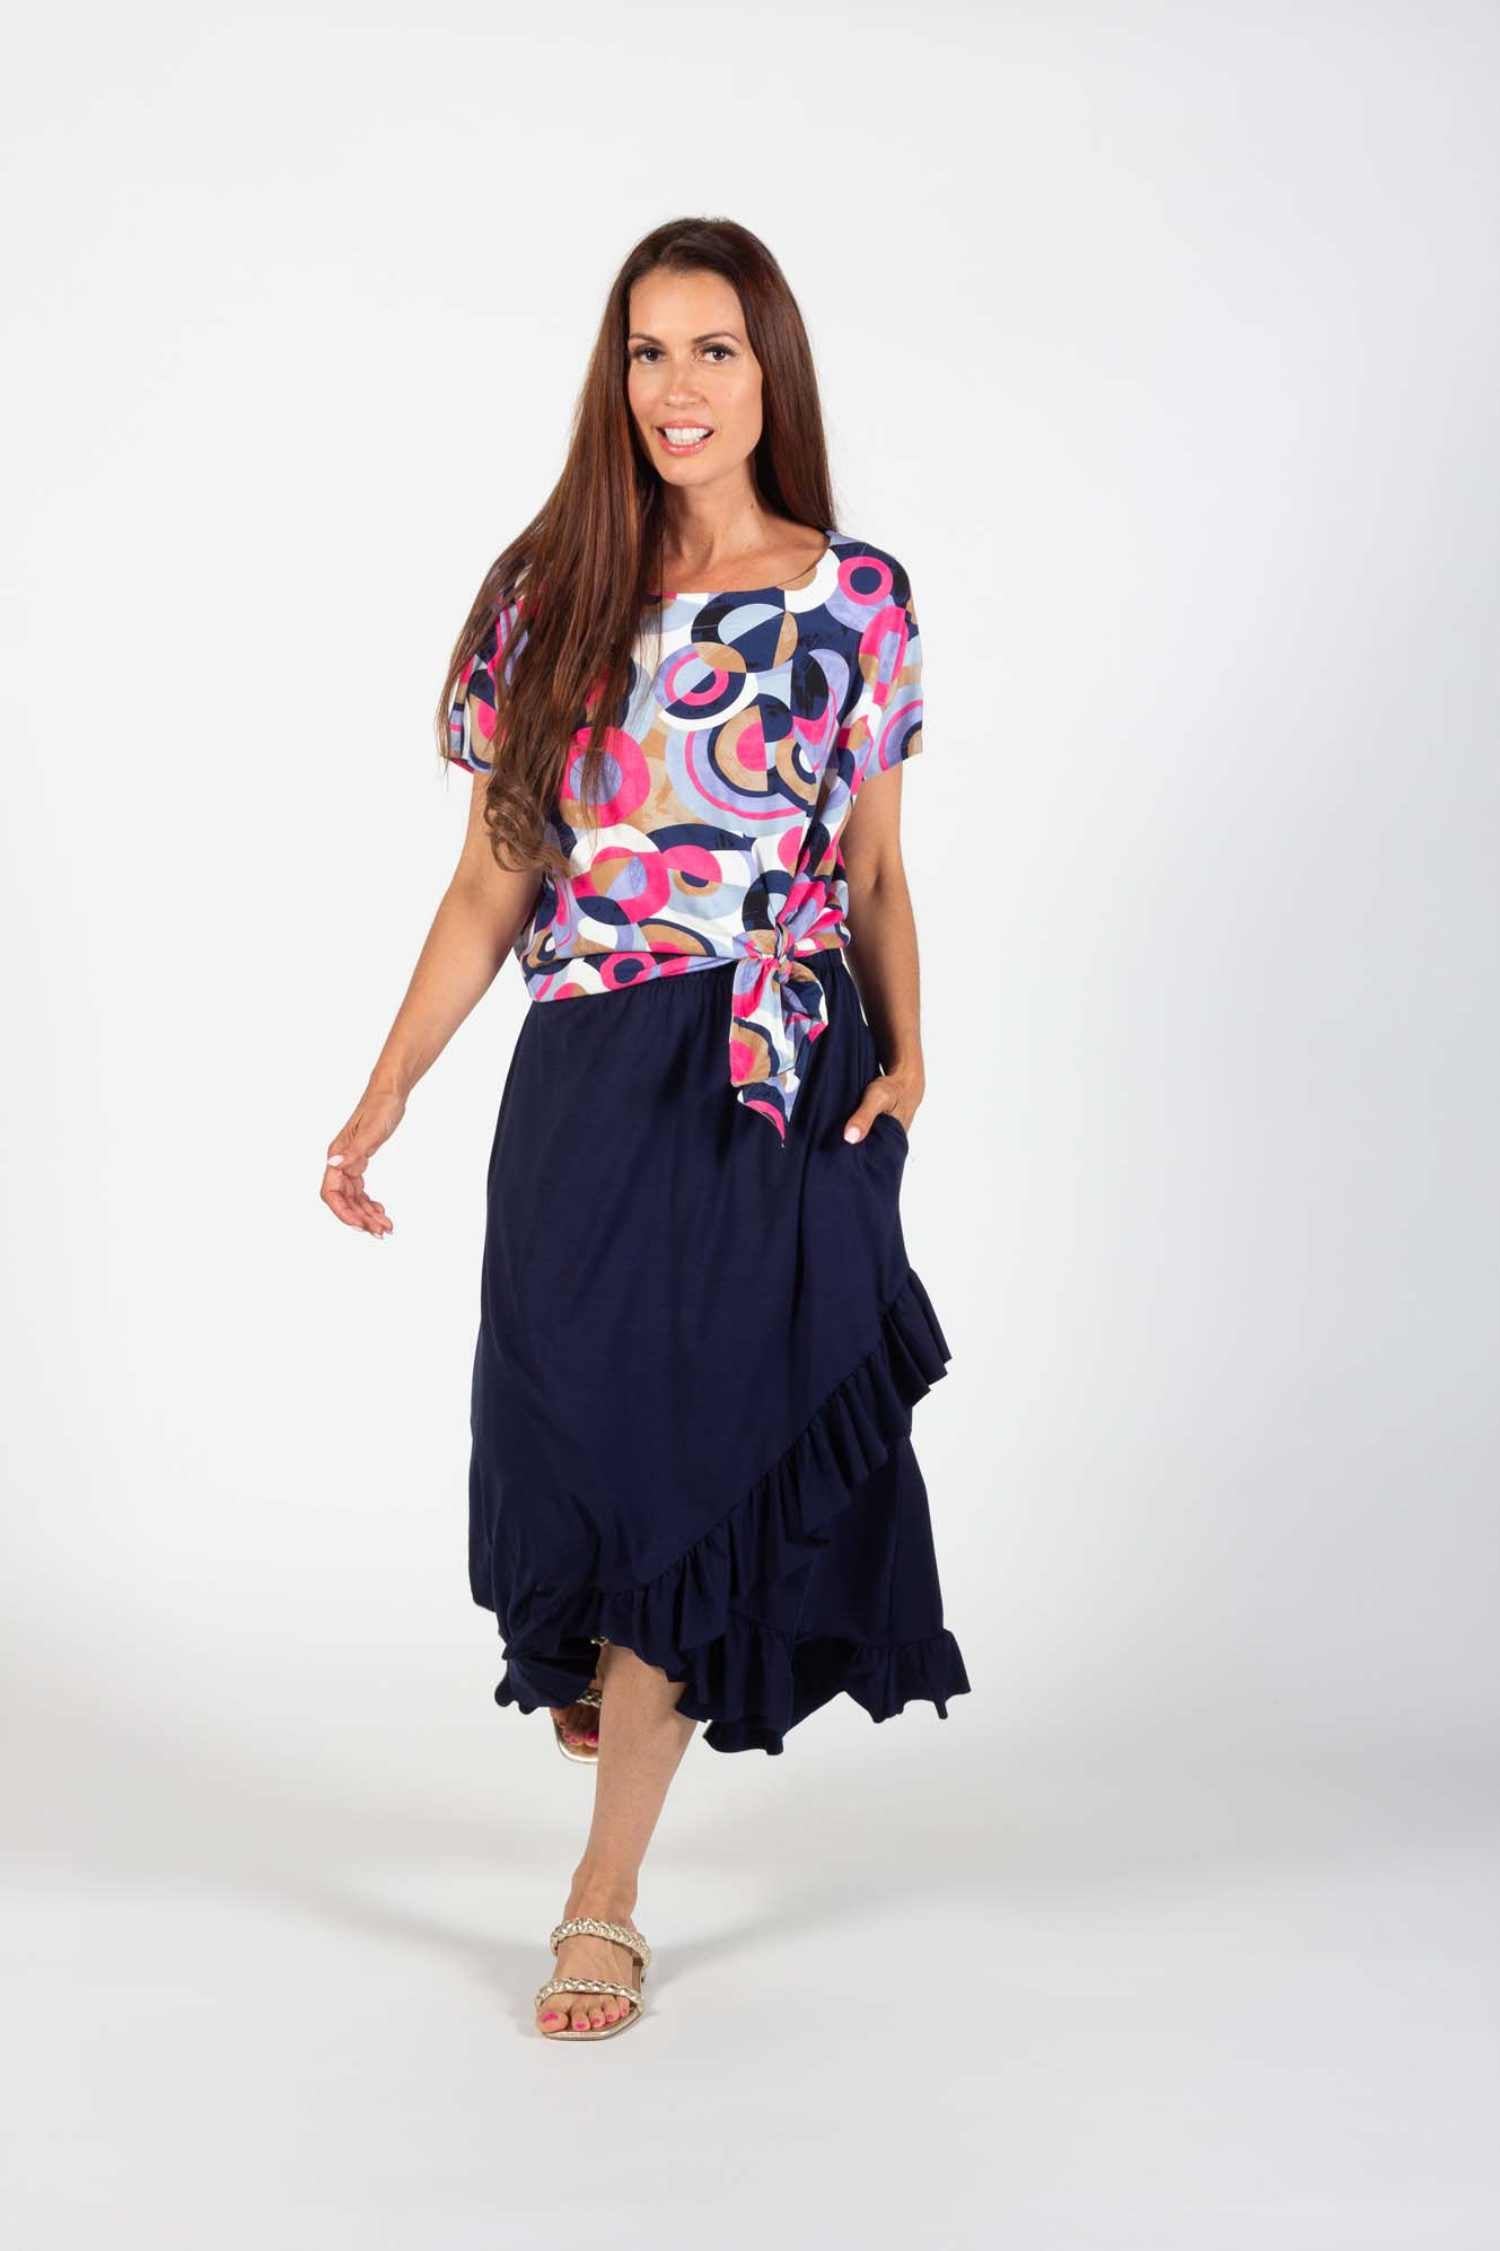 A woman wearing the Cameron Top and Catrina Skirt in Navy by Pure Essence standing in front of a white background